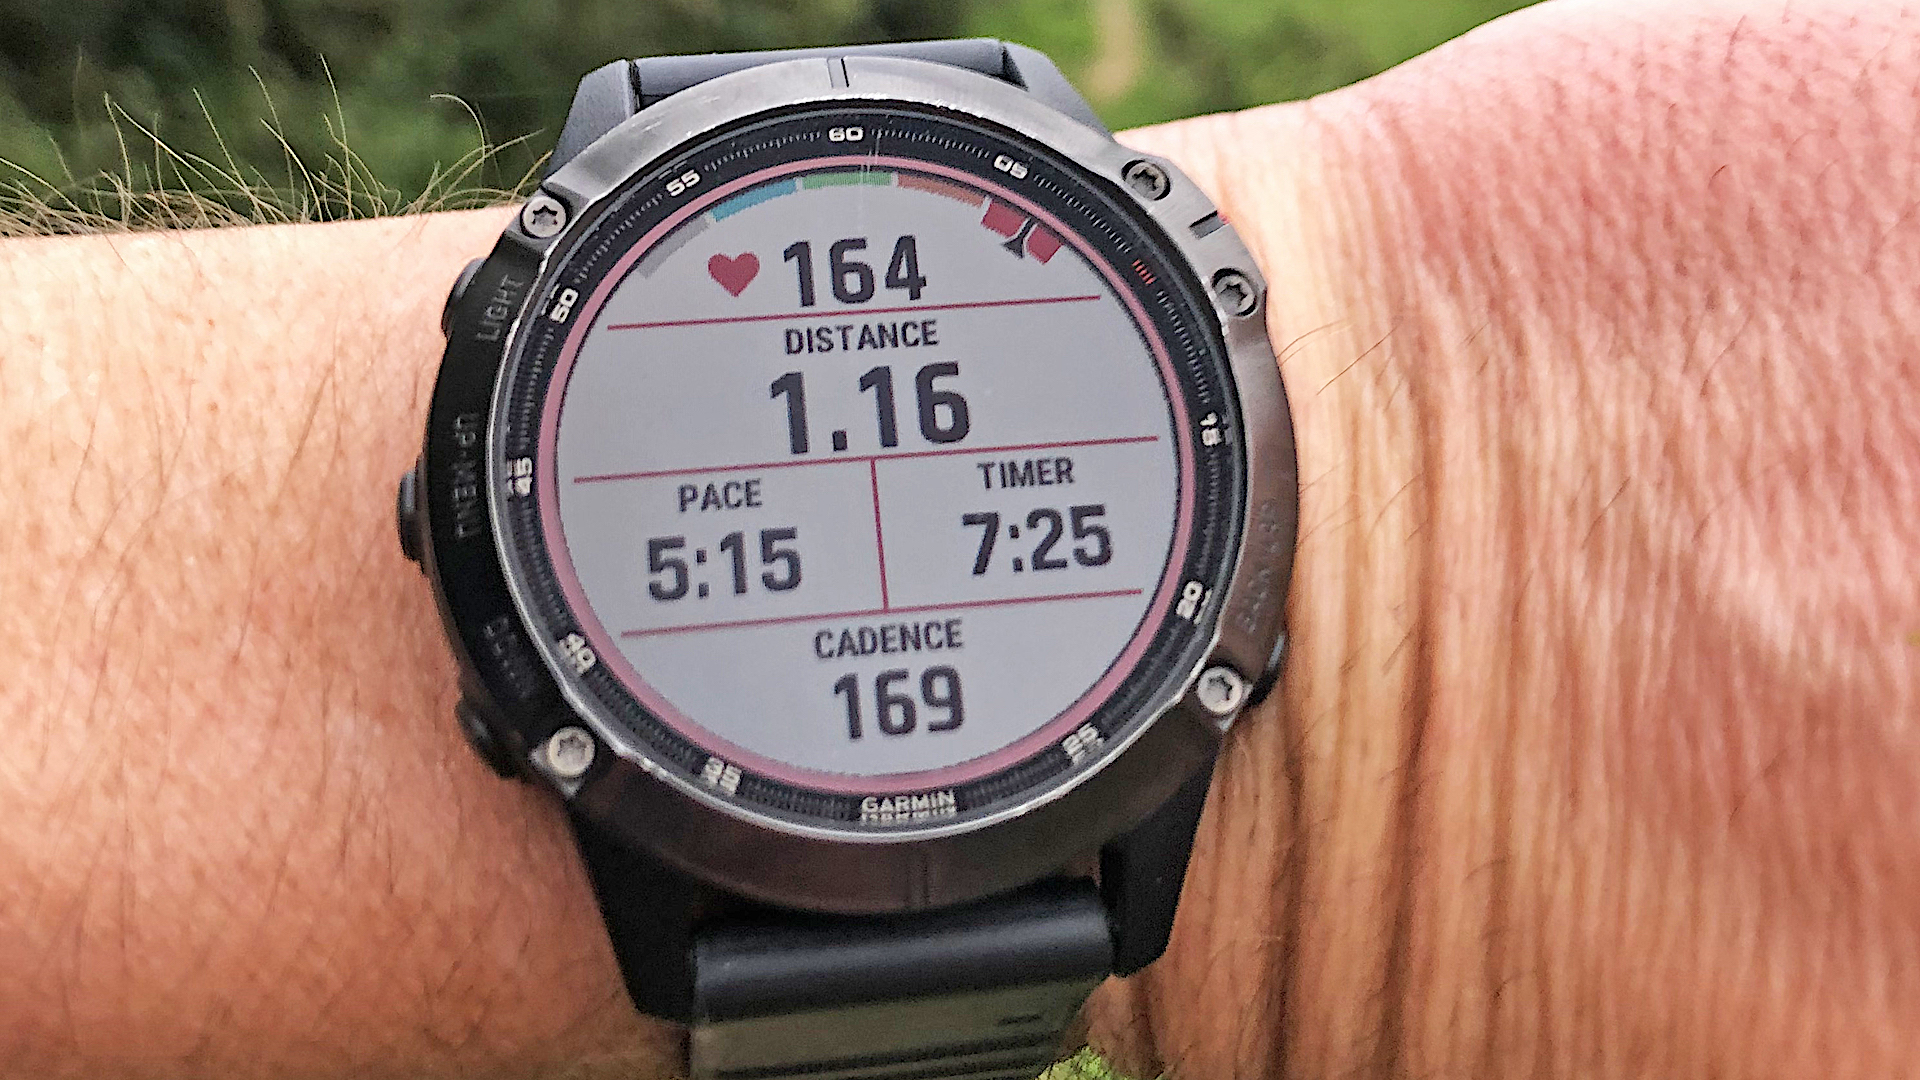 mangfoldighed klo Vild An important software update is coming for your Garmin Fenix 6 | Advnture